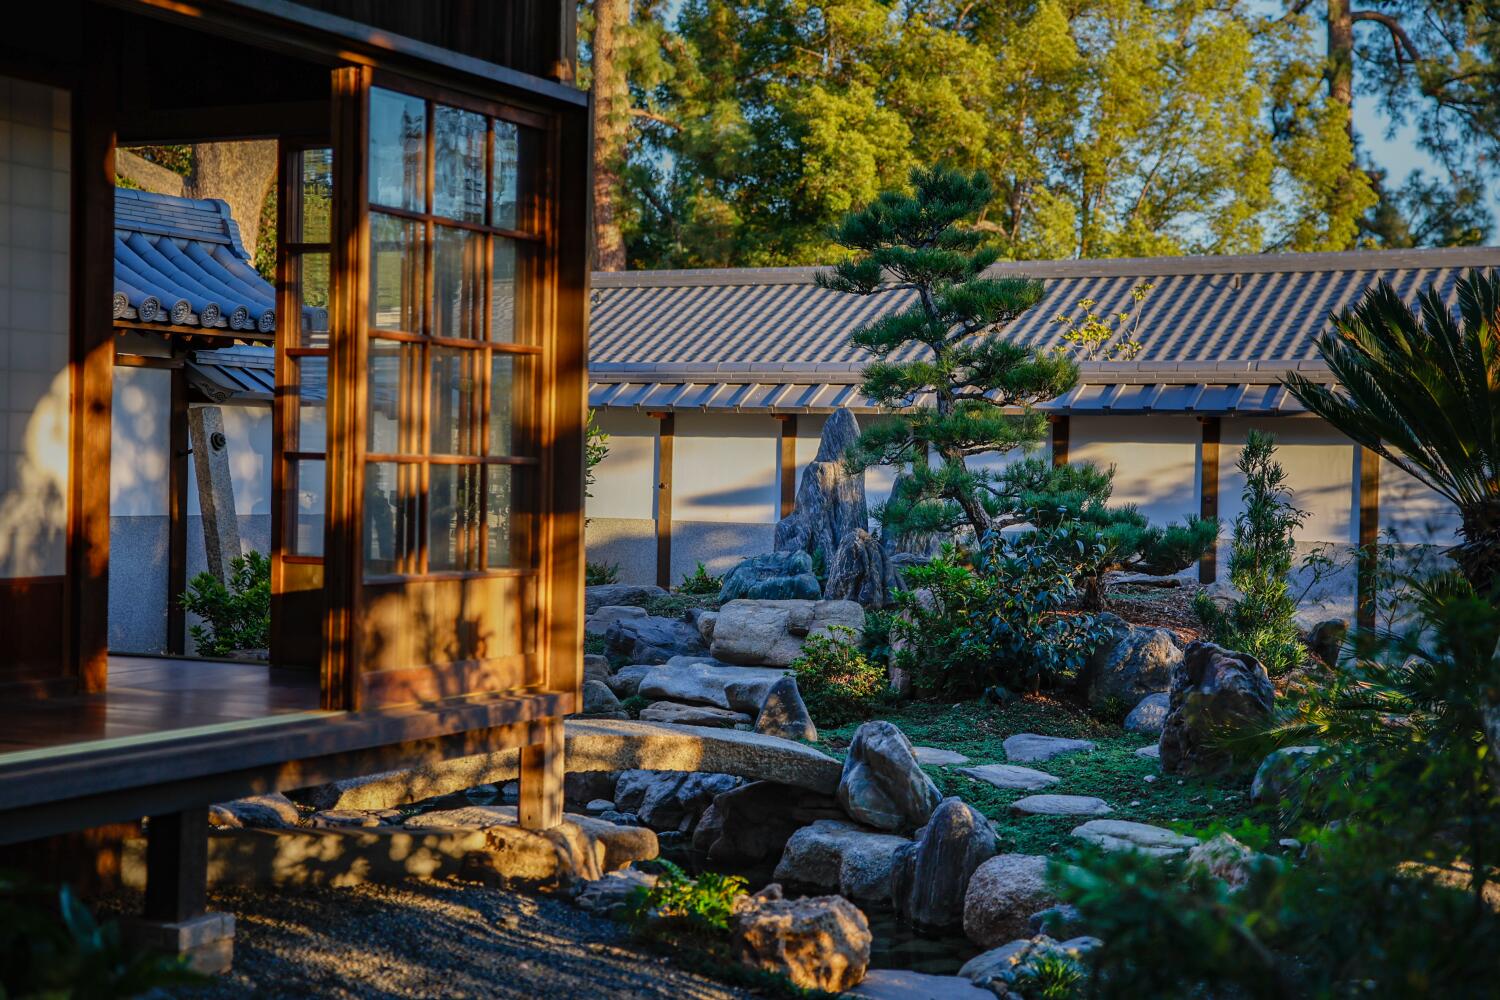 An ancient Japanese home was rebuilt in L.A. Now's your chance to look inside